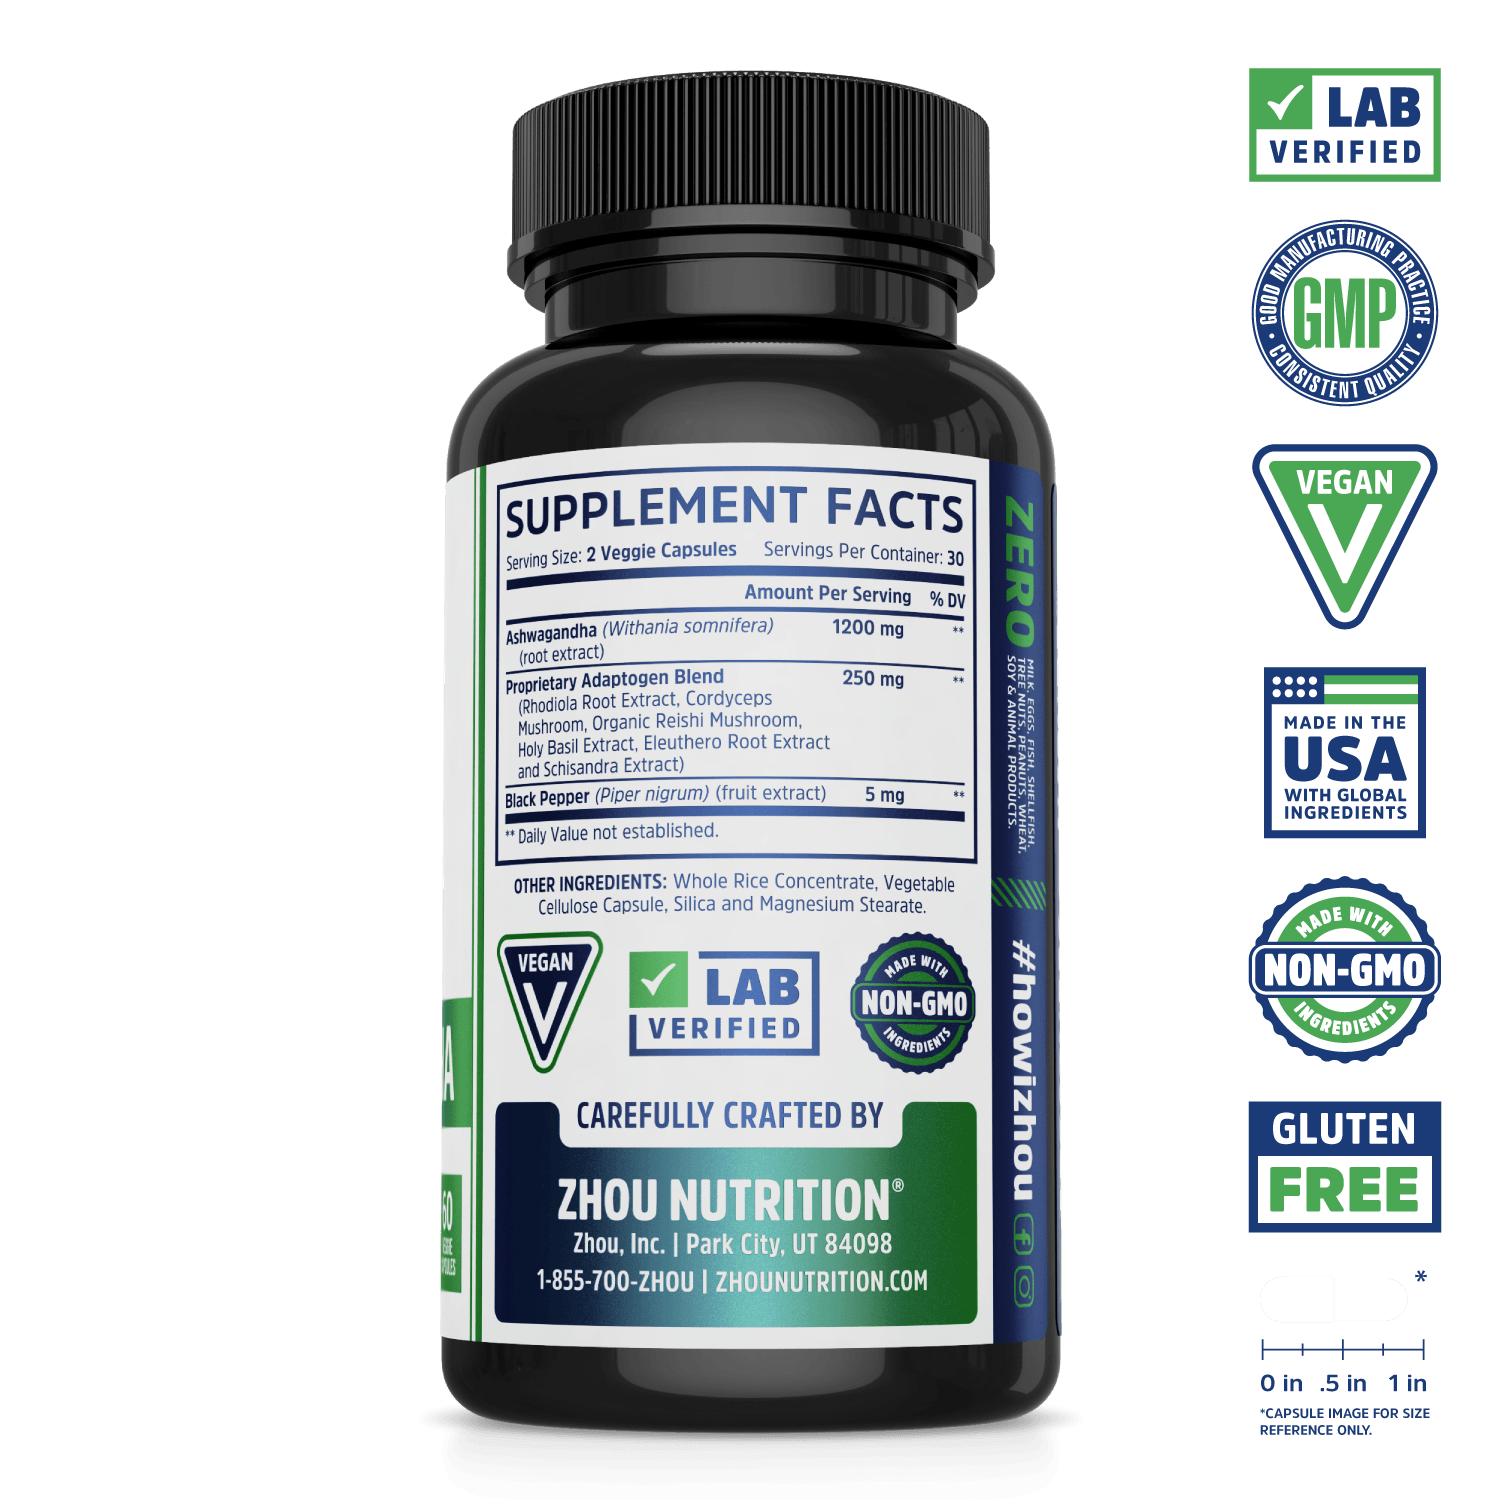 Max Strength Ashwagandha Blend Zhou Nutrition. Bottle side. Lab verified, good manufacturing practices, vegan, made with non-GMO ingredients, made in the USA with global ingredients, gluten free.